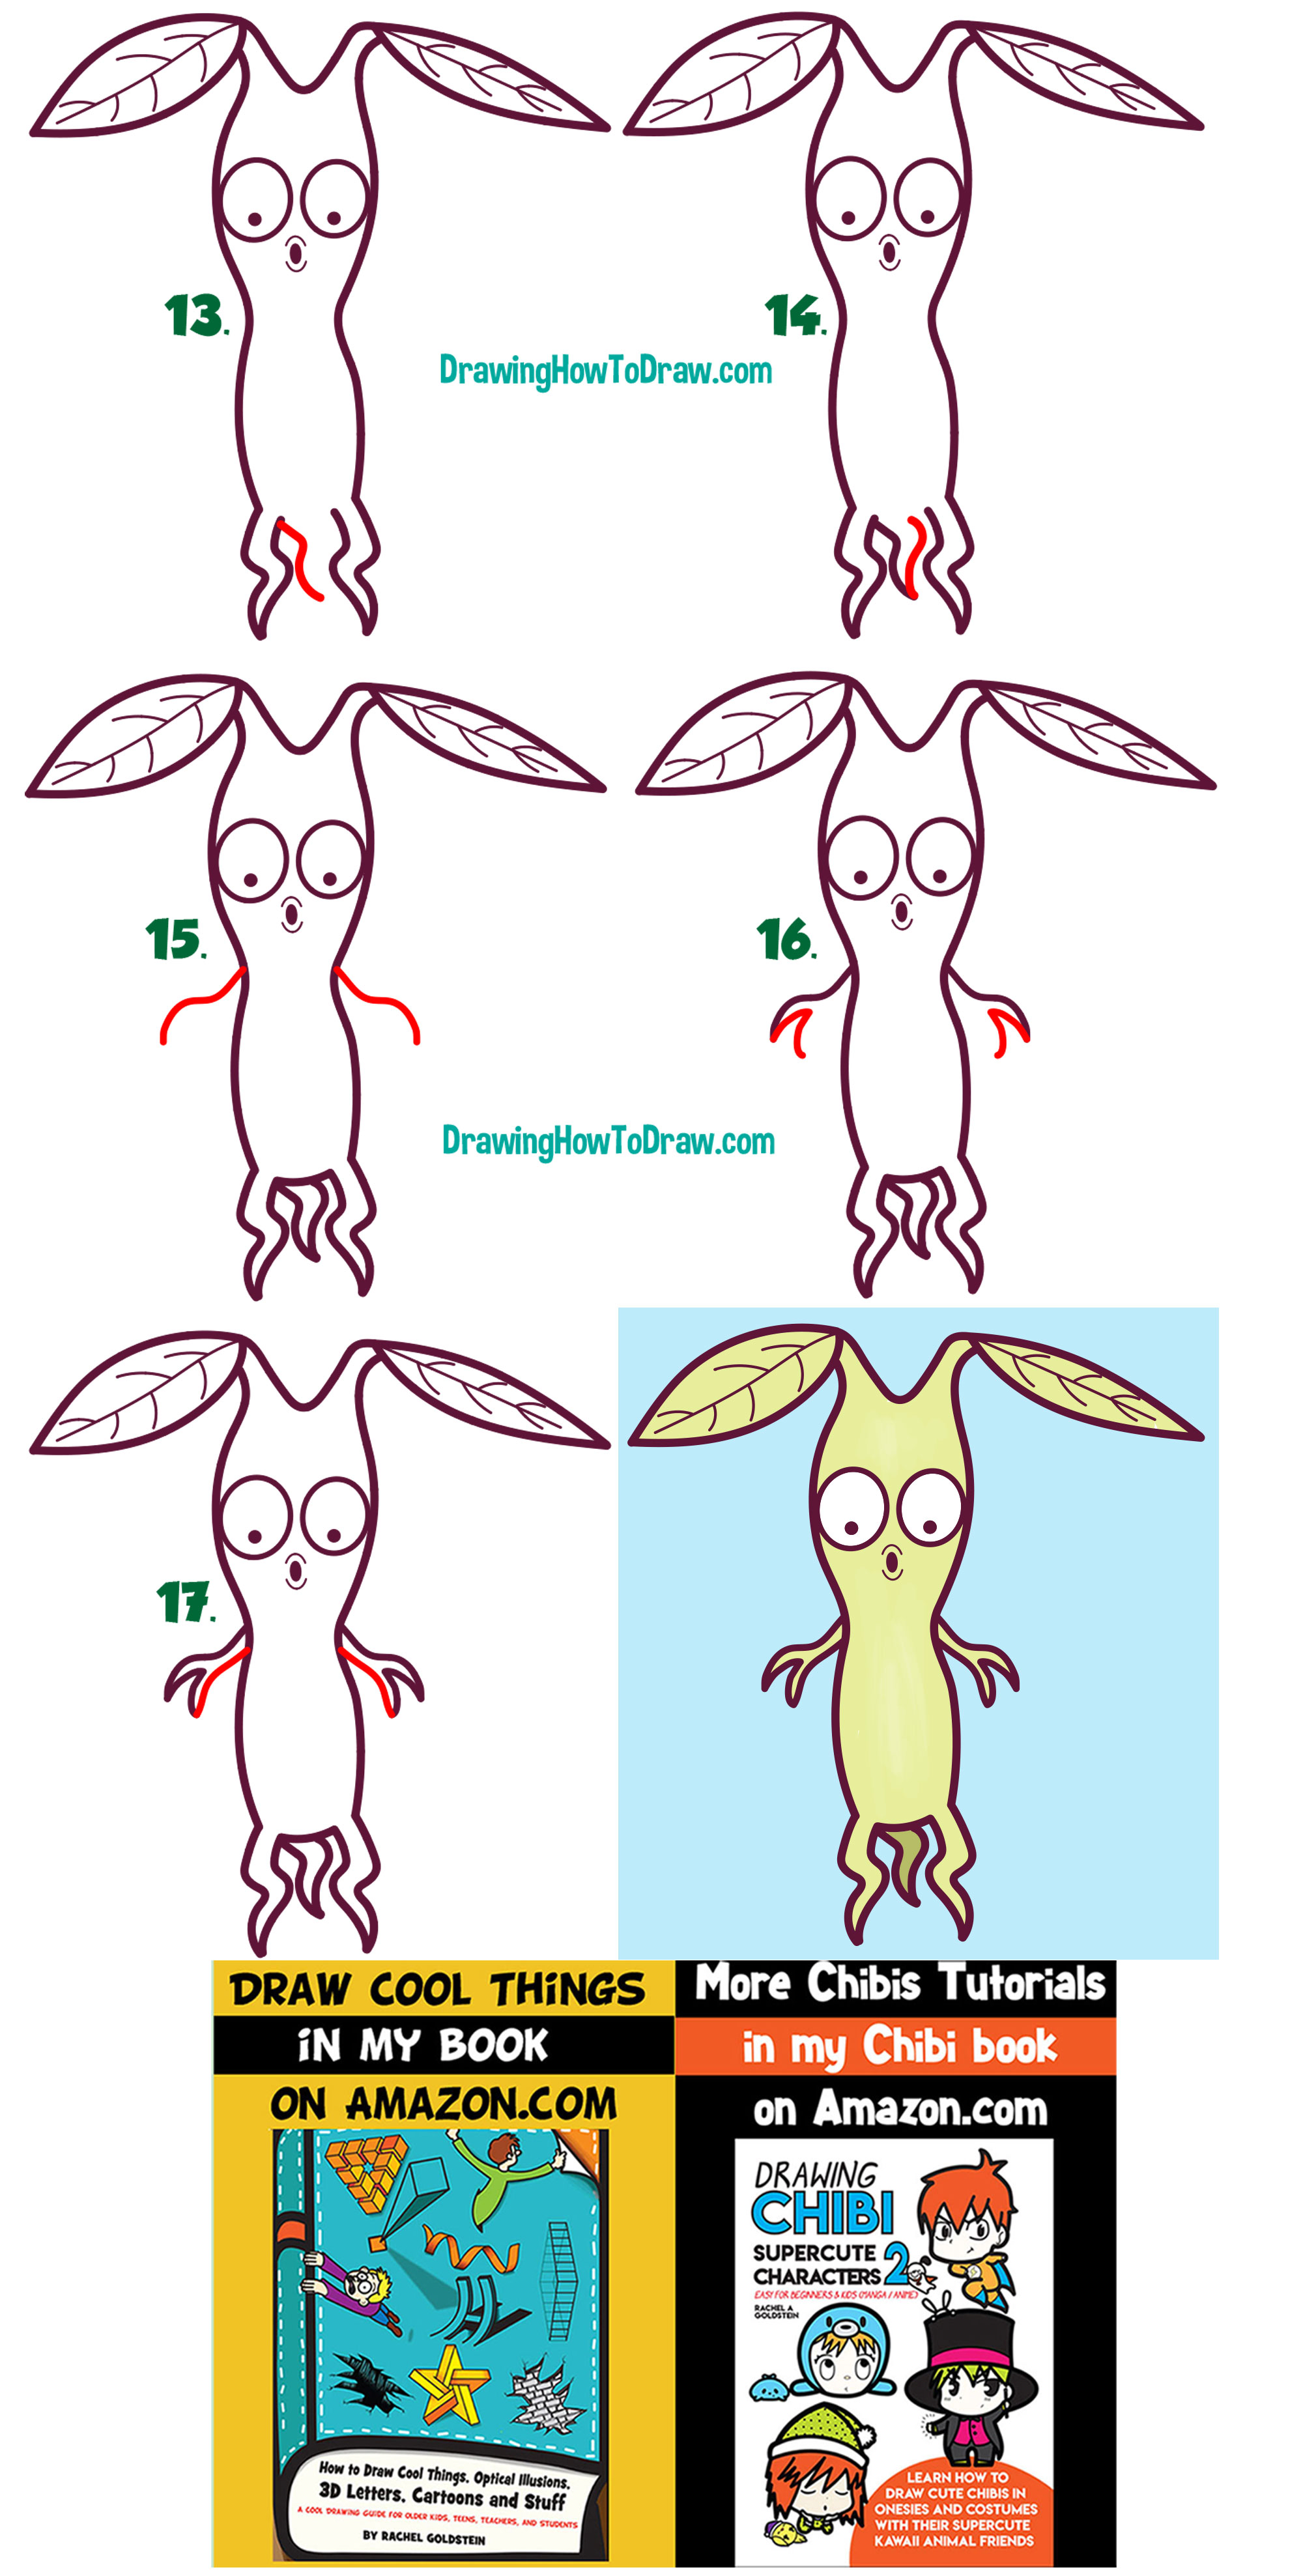 Learn How to Draw a Cute Pickett / Bowtruckle from Fantastic Beasts + Harry Potter (Chibi / Kawaii) Simple Steps Drawing Lesson for Kids